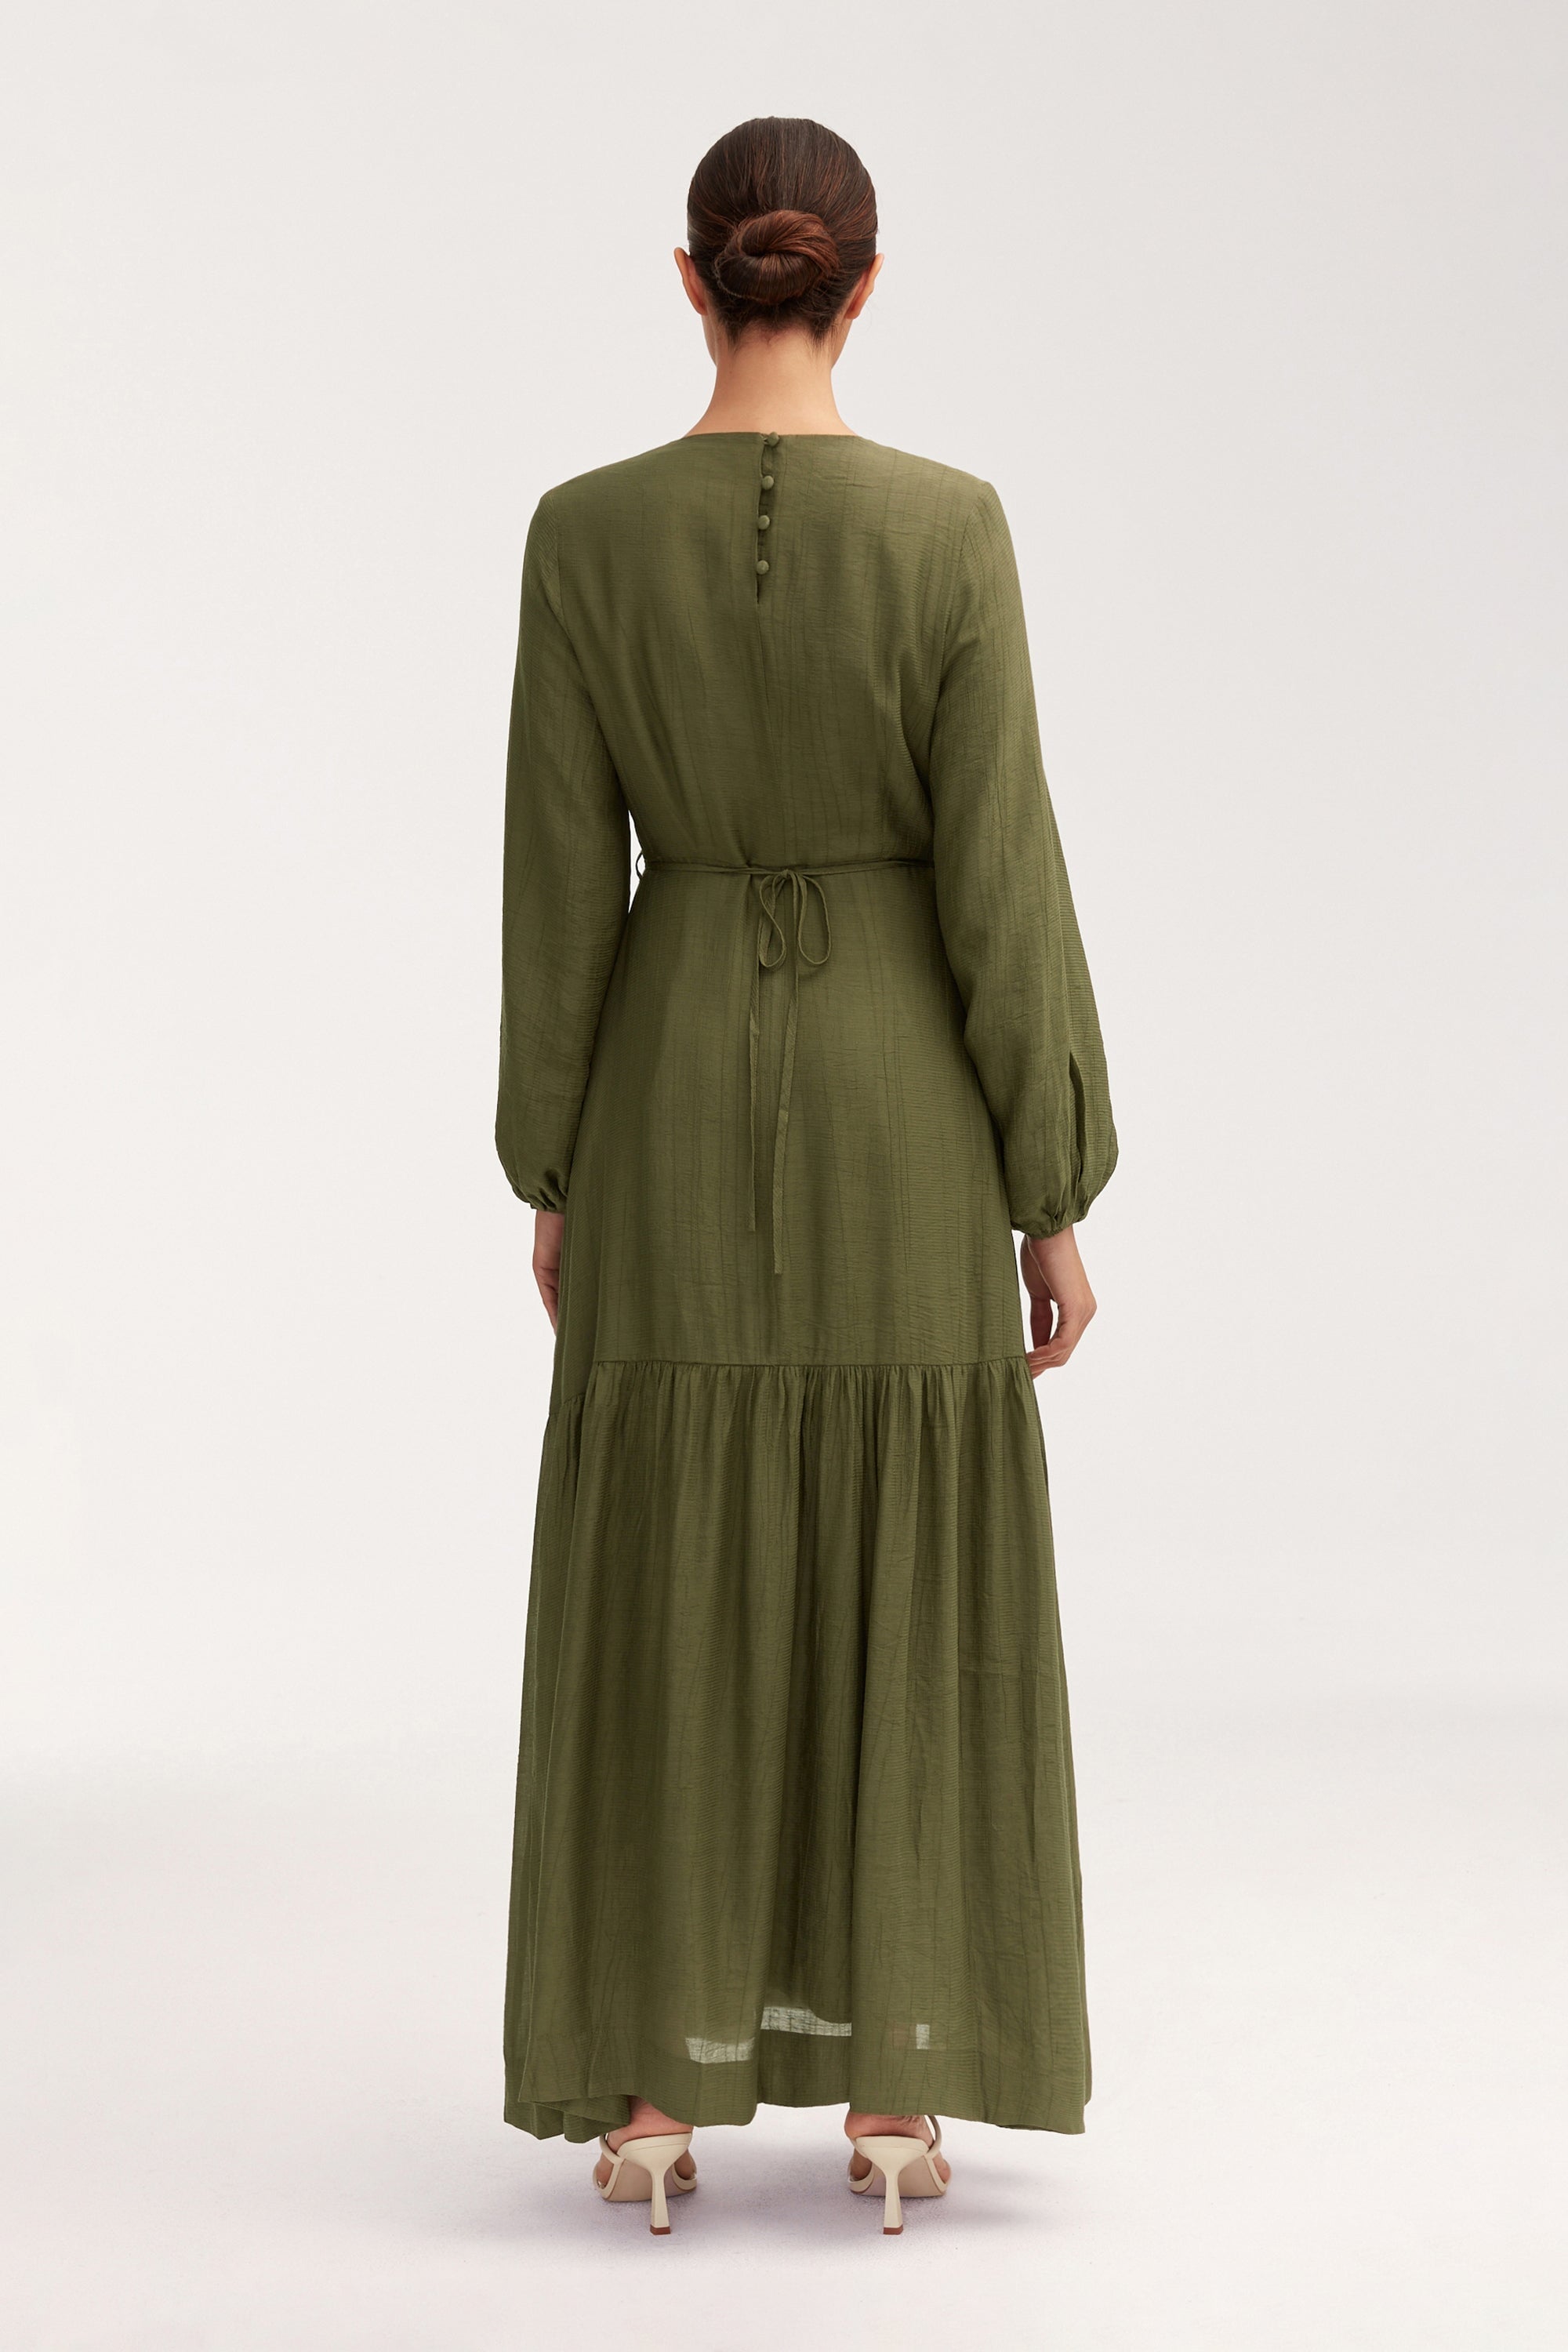 Mila Tiered Maxi Dress - Olive Green Clothing Veiled 